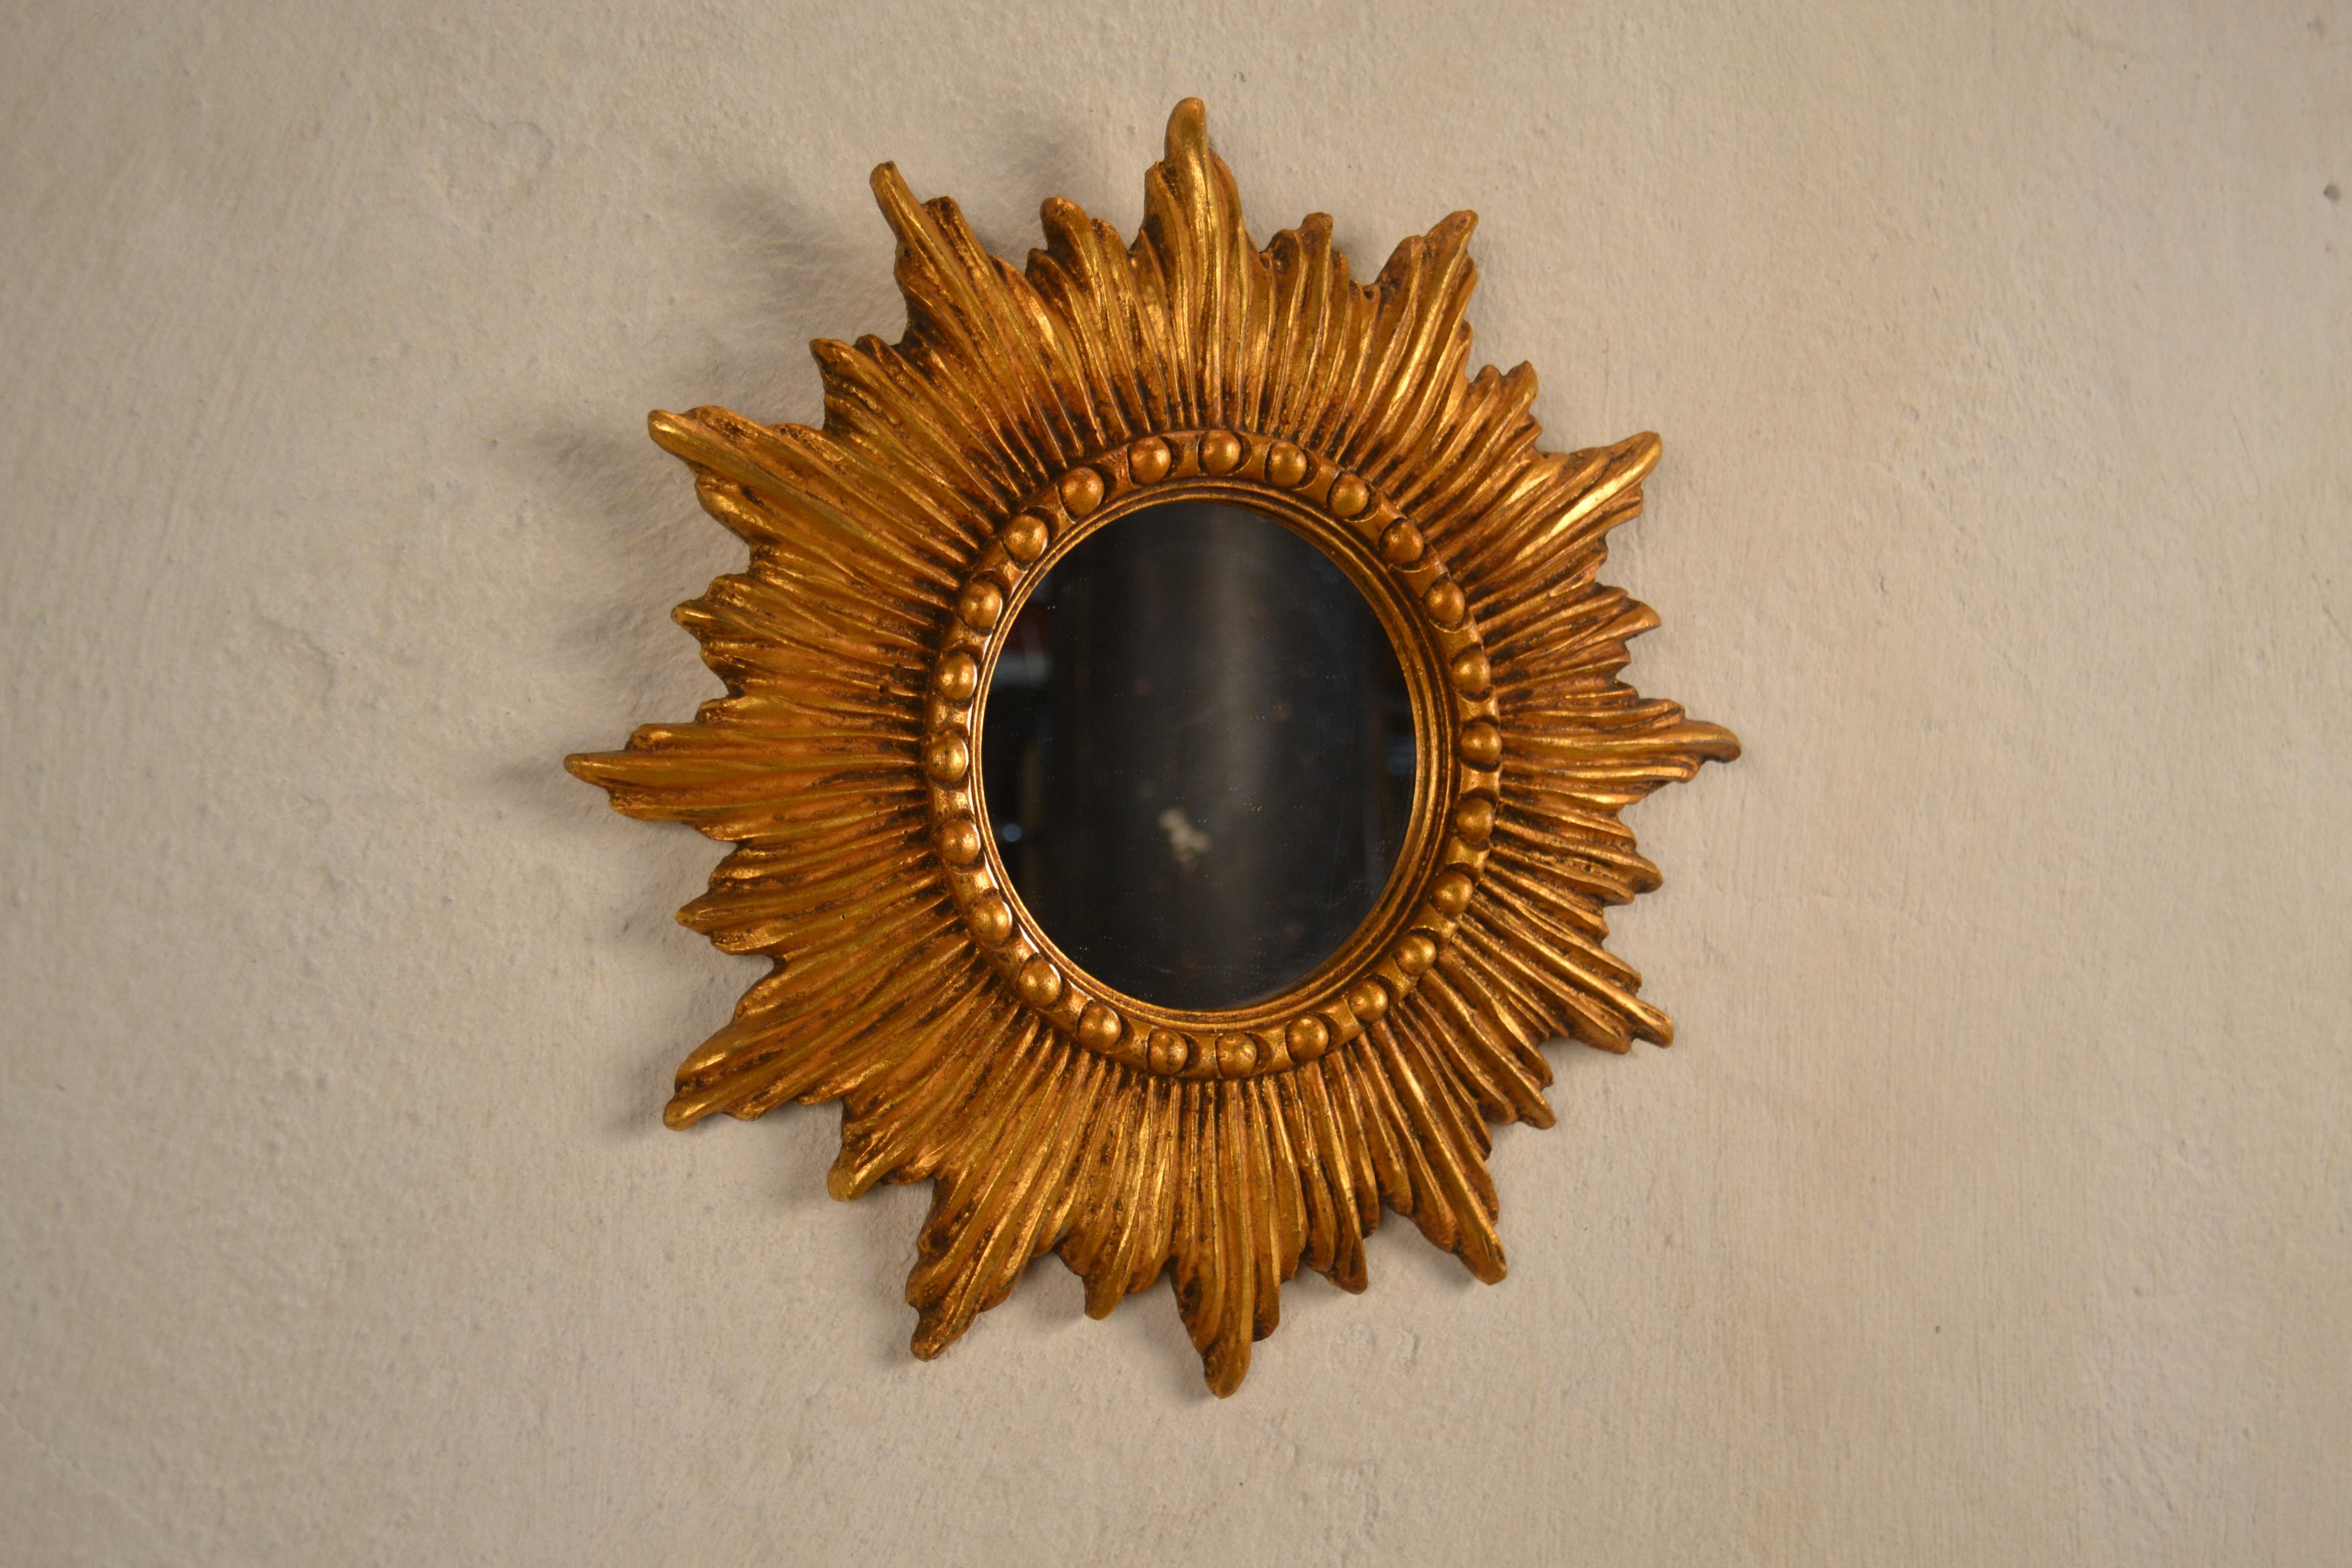 French, sunny mirror from the 1950s fully original, without renovation. Cool, timeless form.